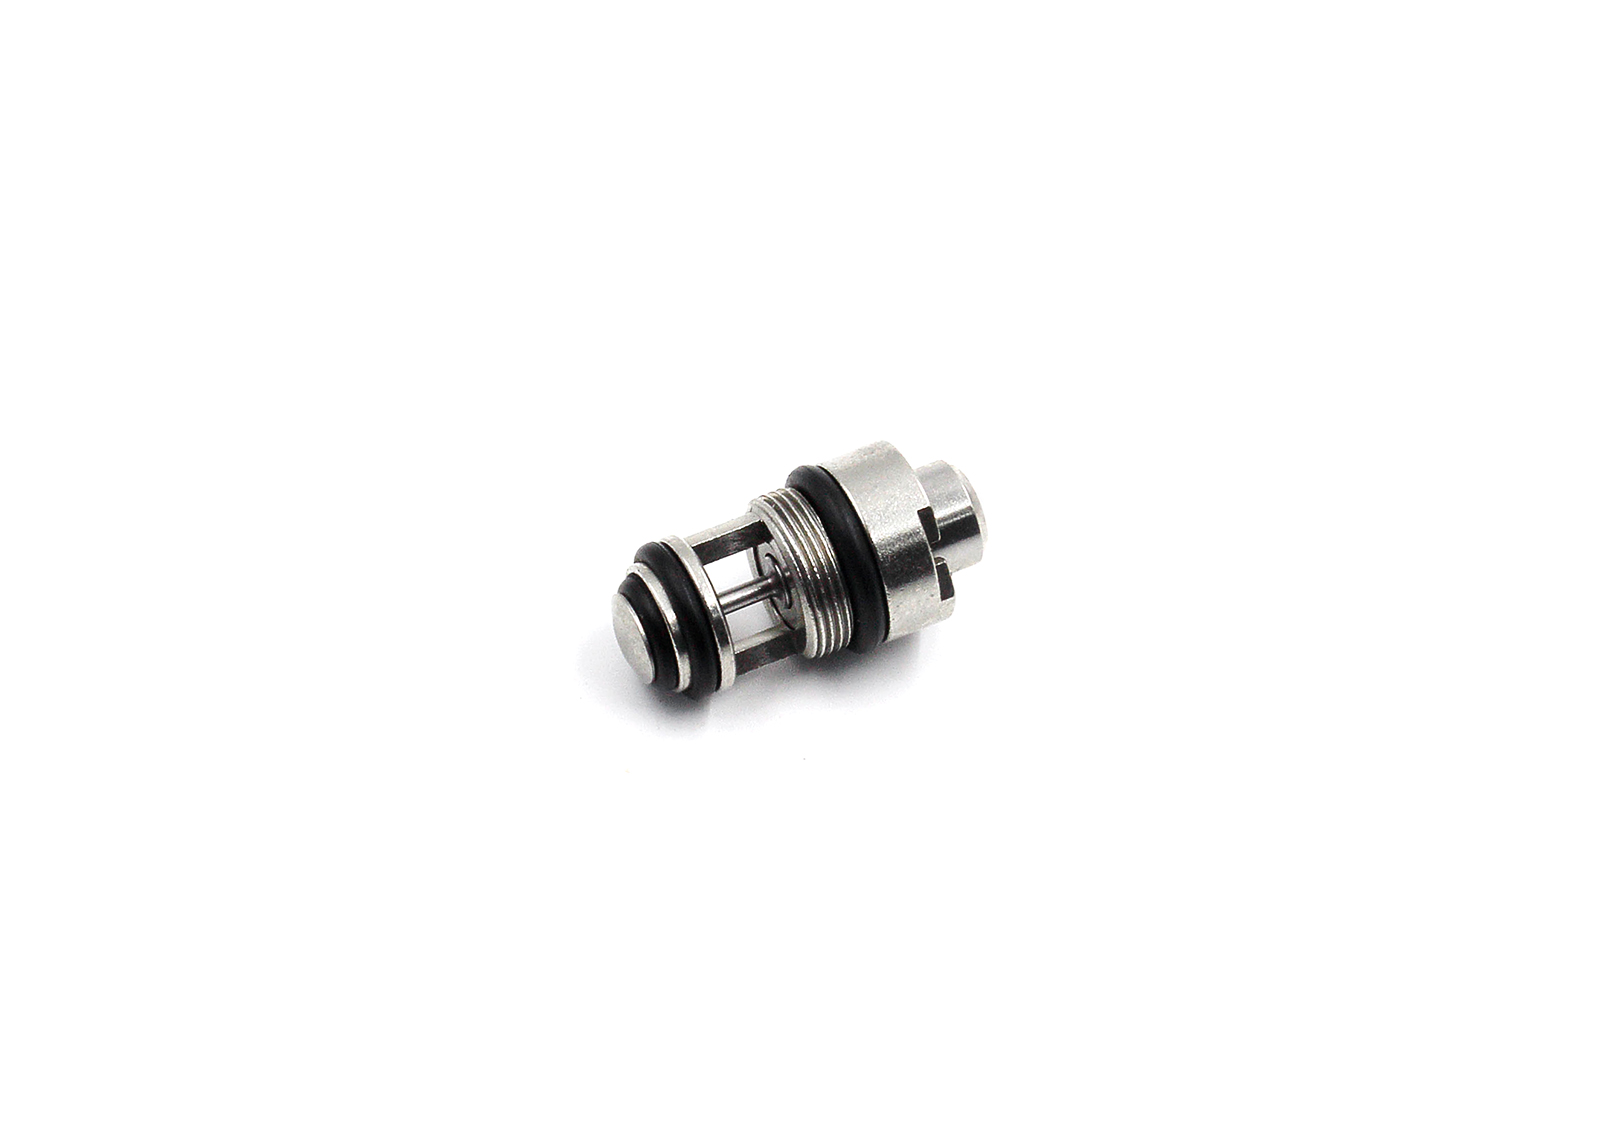 Stainless High Output Valve for MARUI HI-CAPA 5.1 - Modify Airsoft